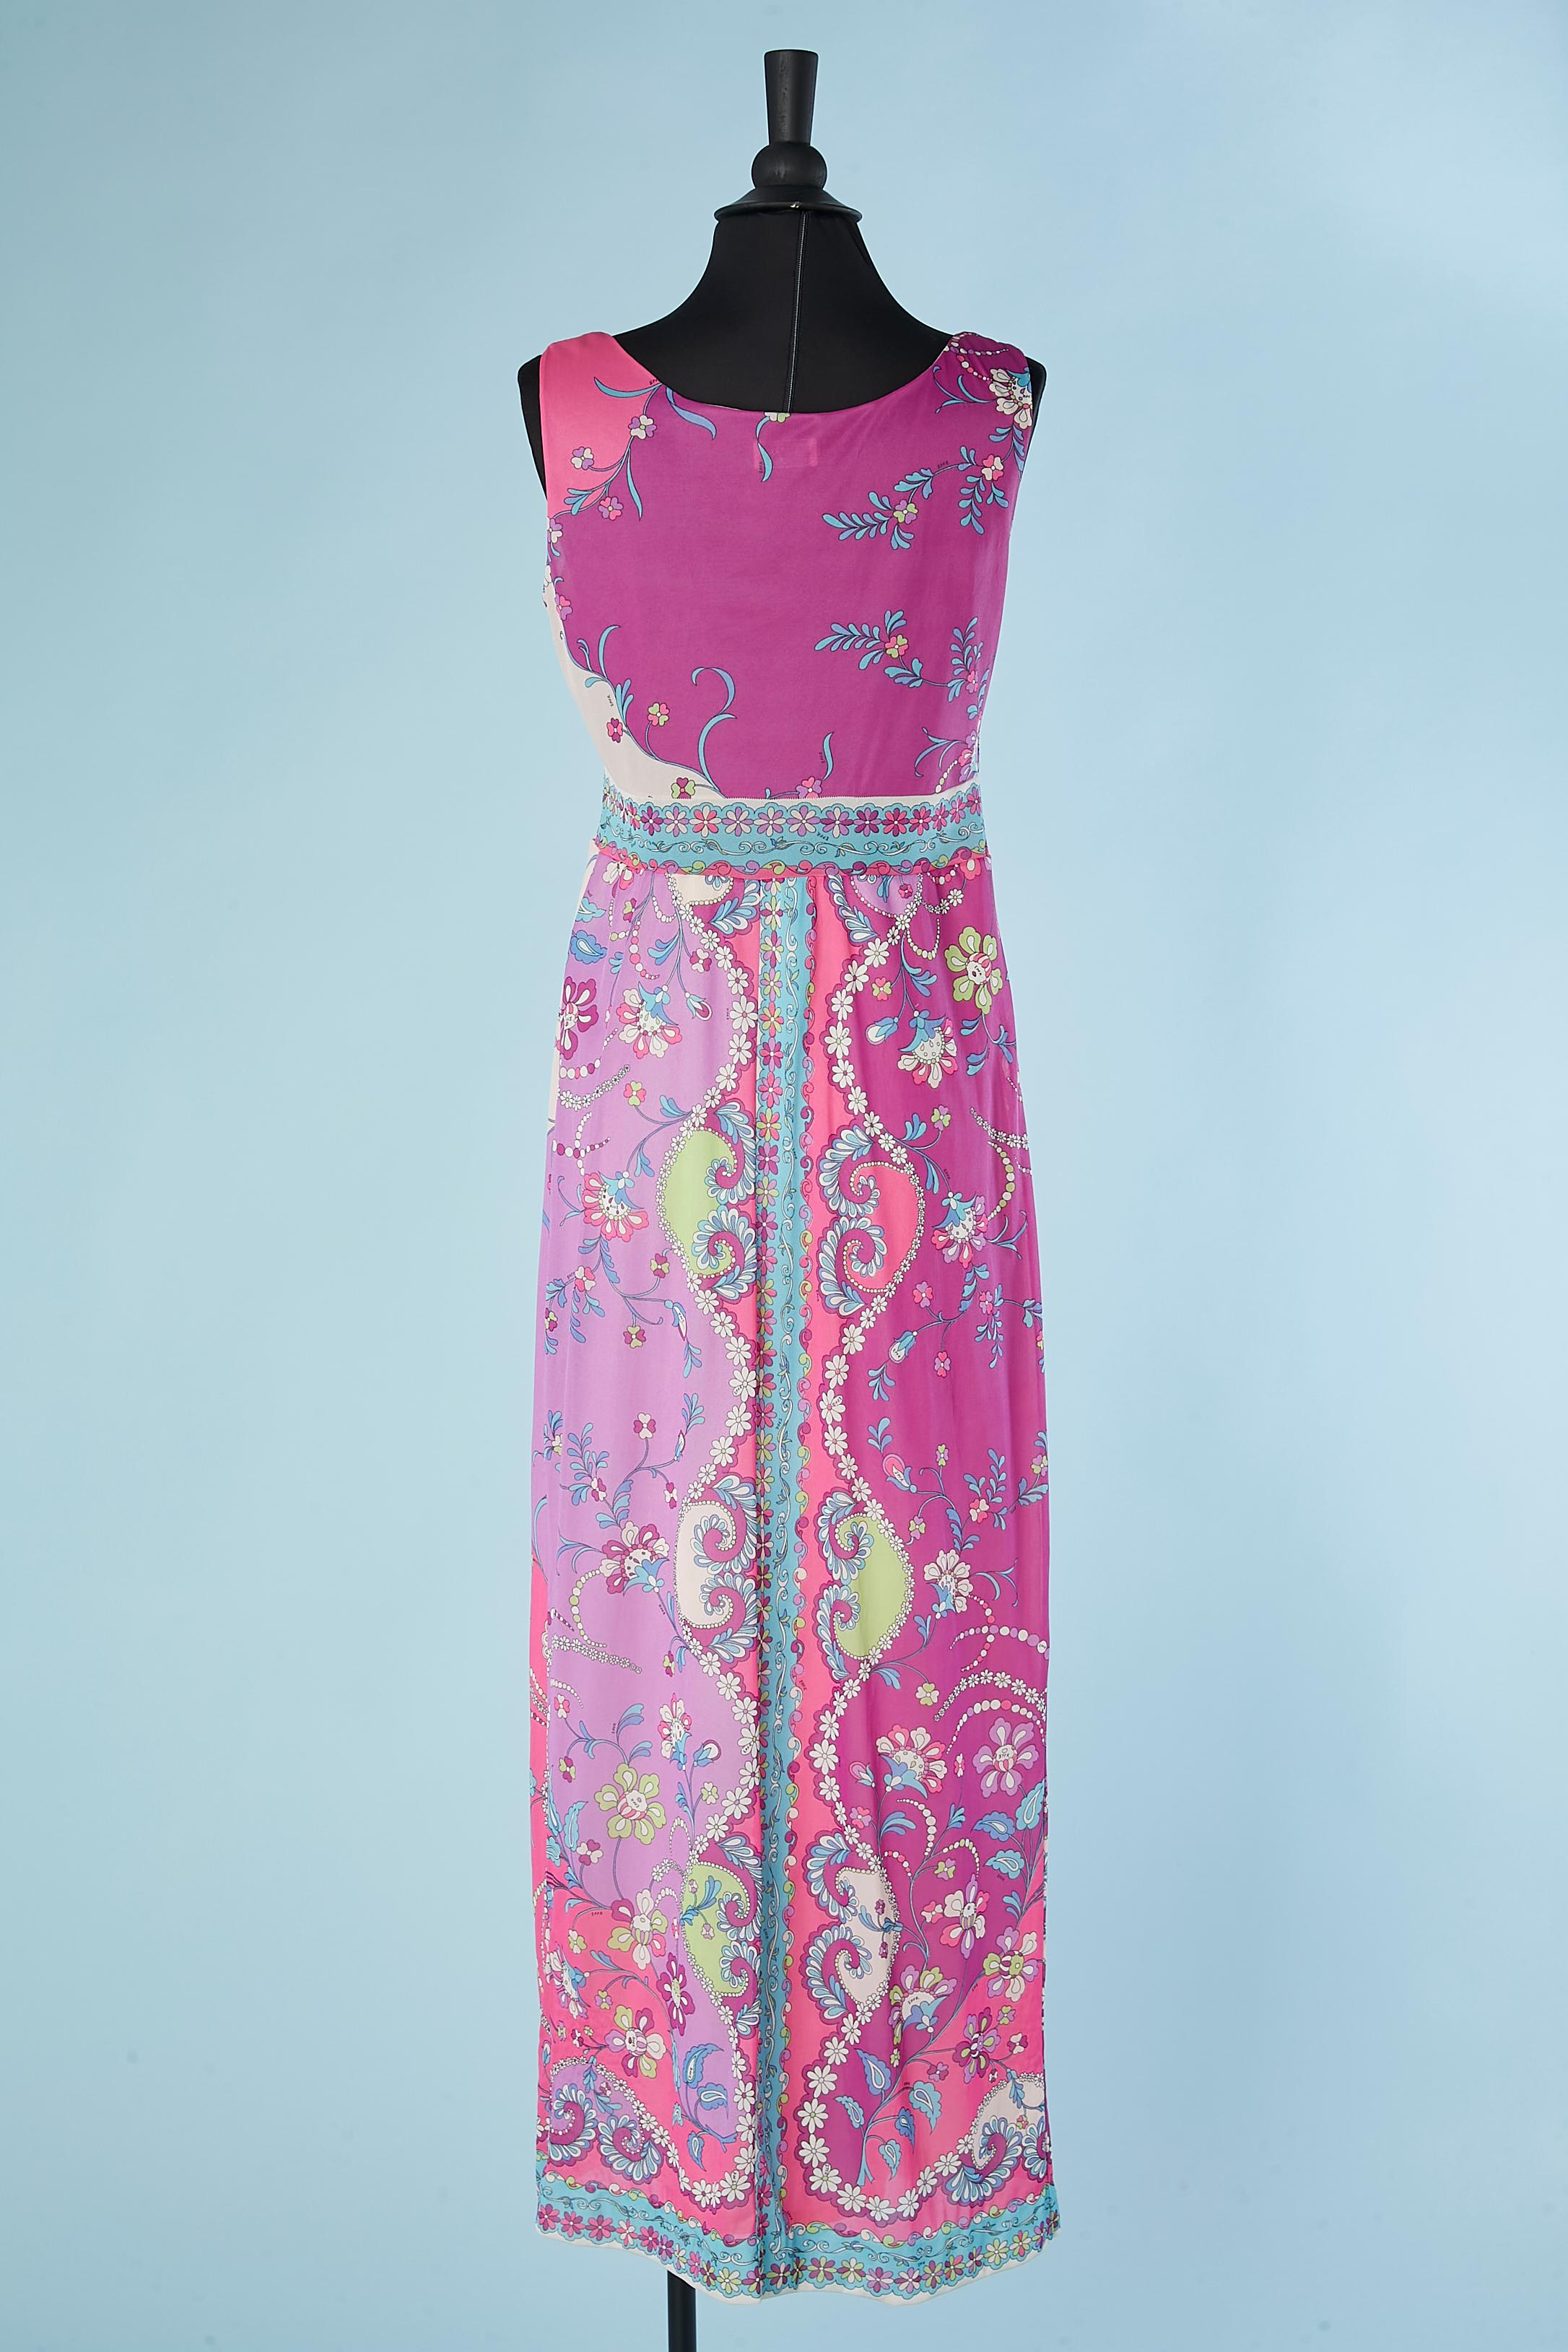 Long sleeveless printed jersey dress Emilio Pucci for Formfit Rodgers Circa 1960 For Sale 2